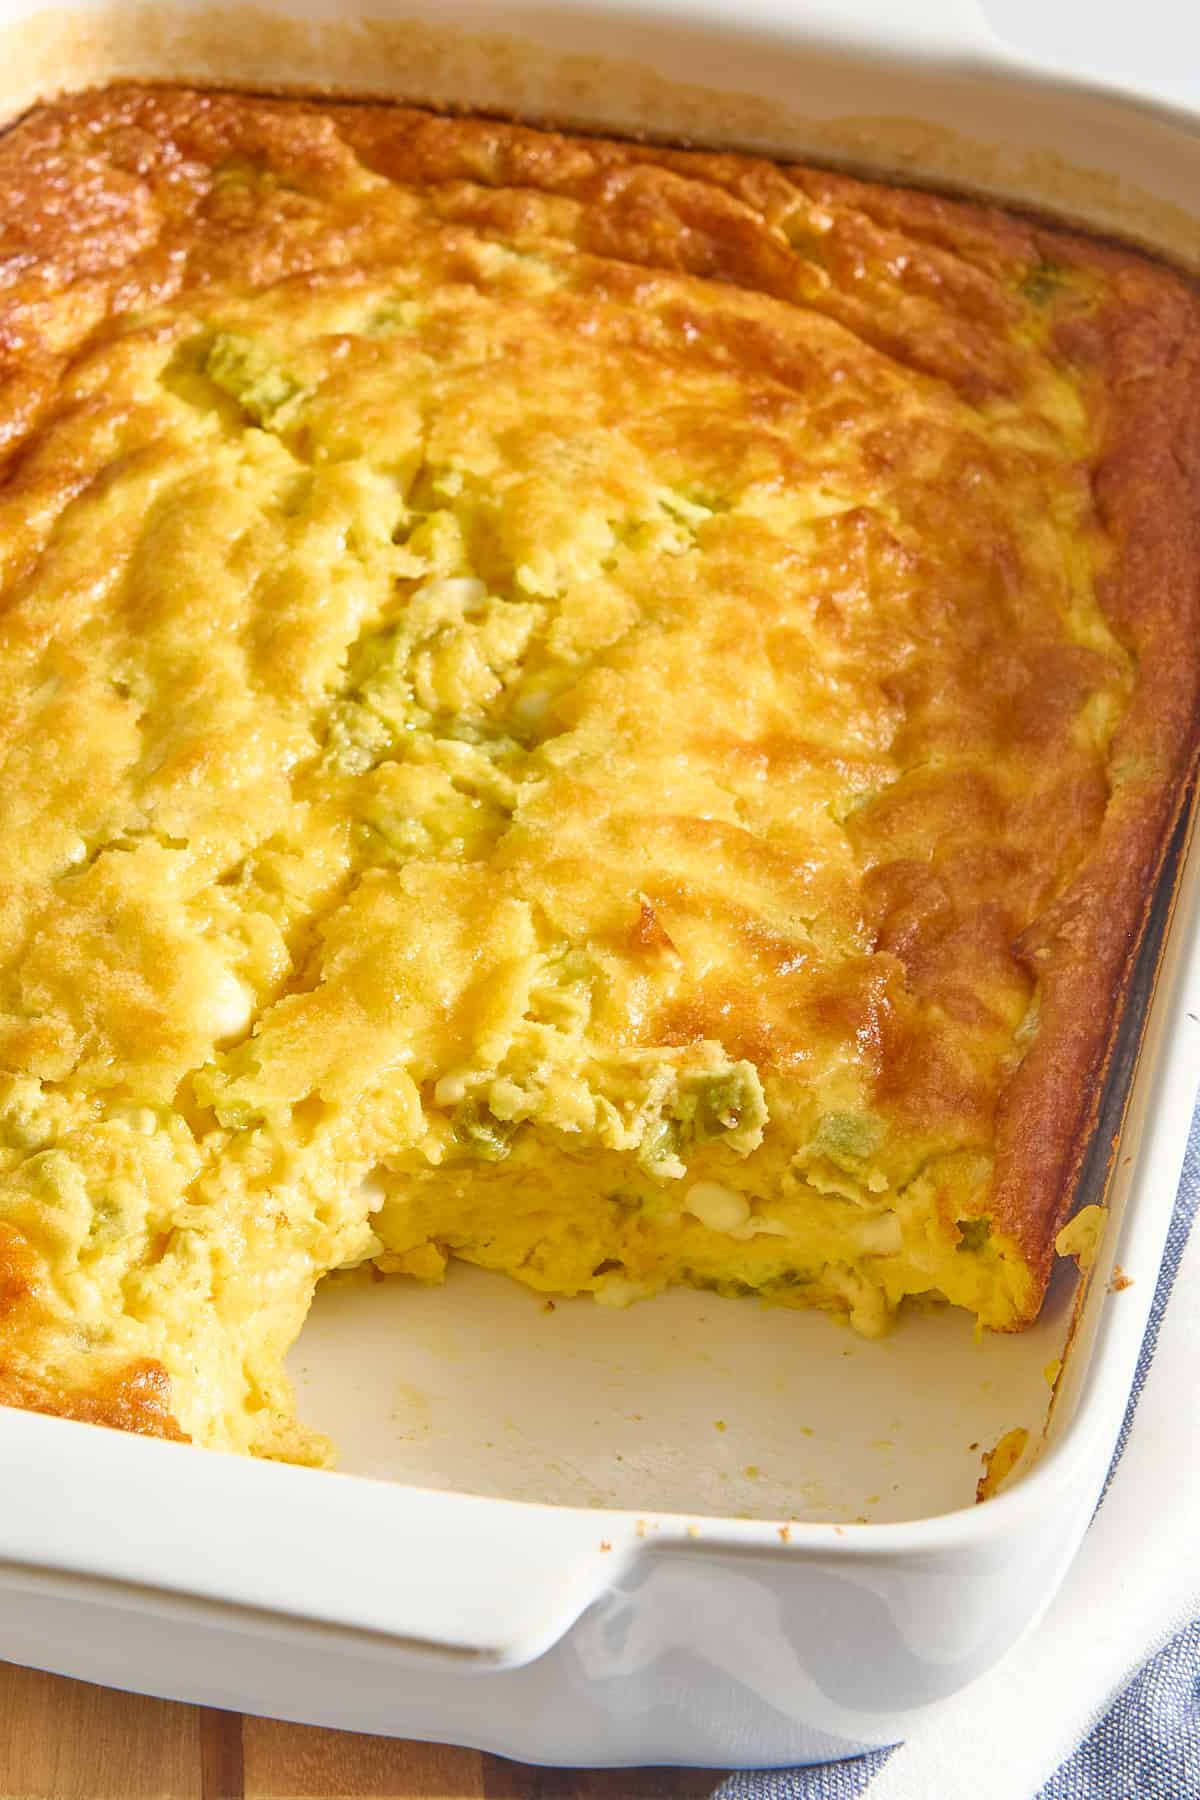 Close-up image of the cross-section of green chili egg casserole.